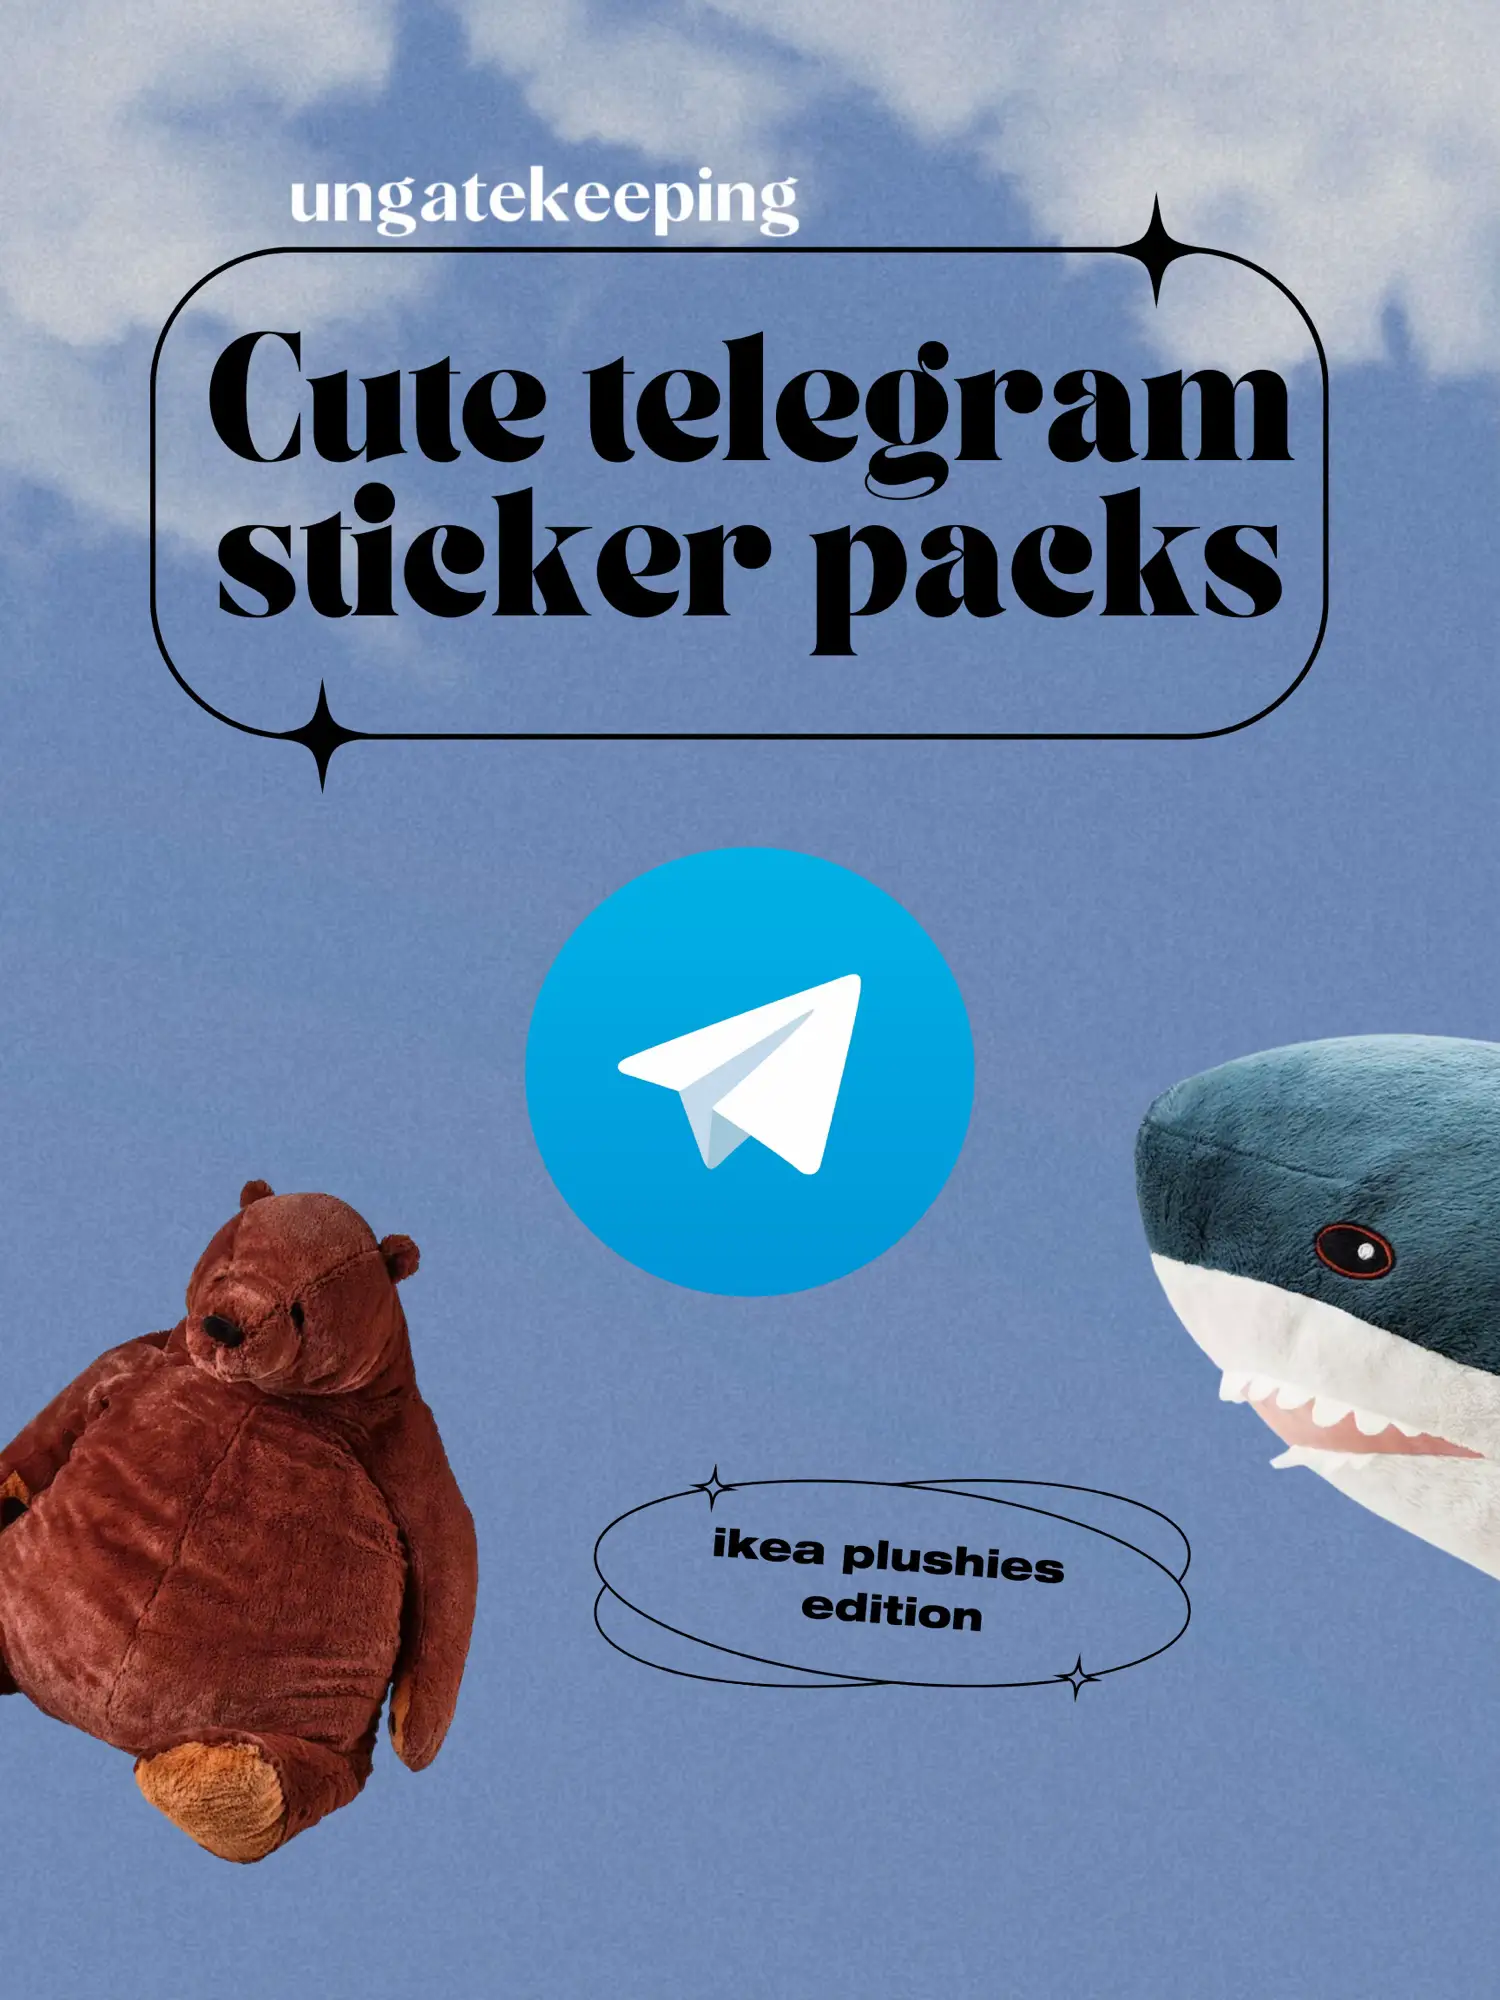 must-have telegram sticker packs 🐻🦈, Gallery posted by rhea*.˚✧